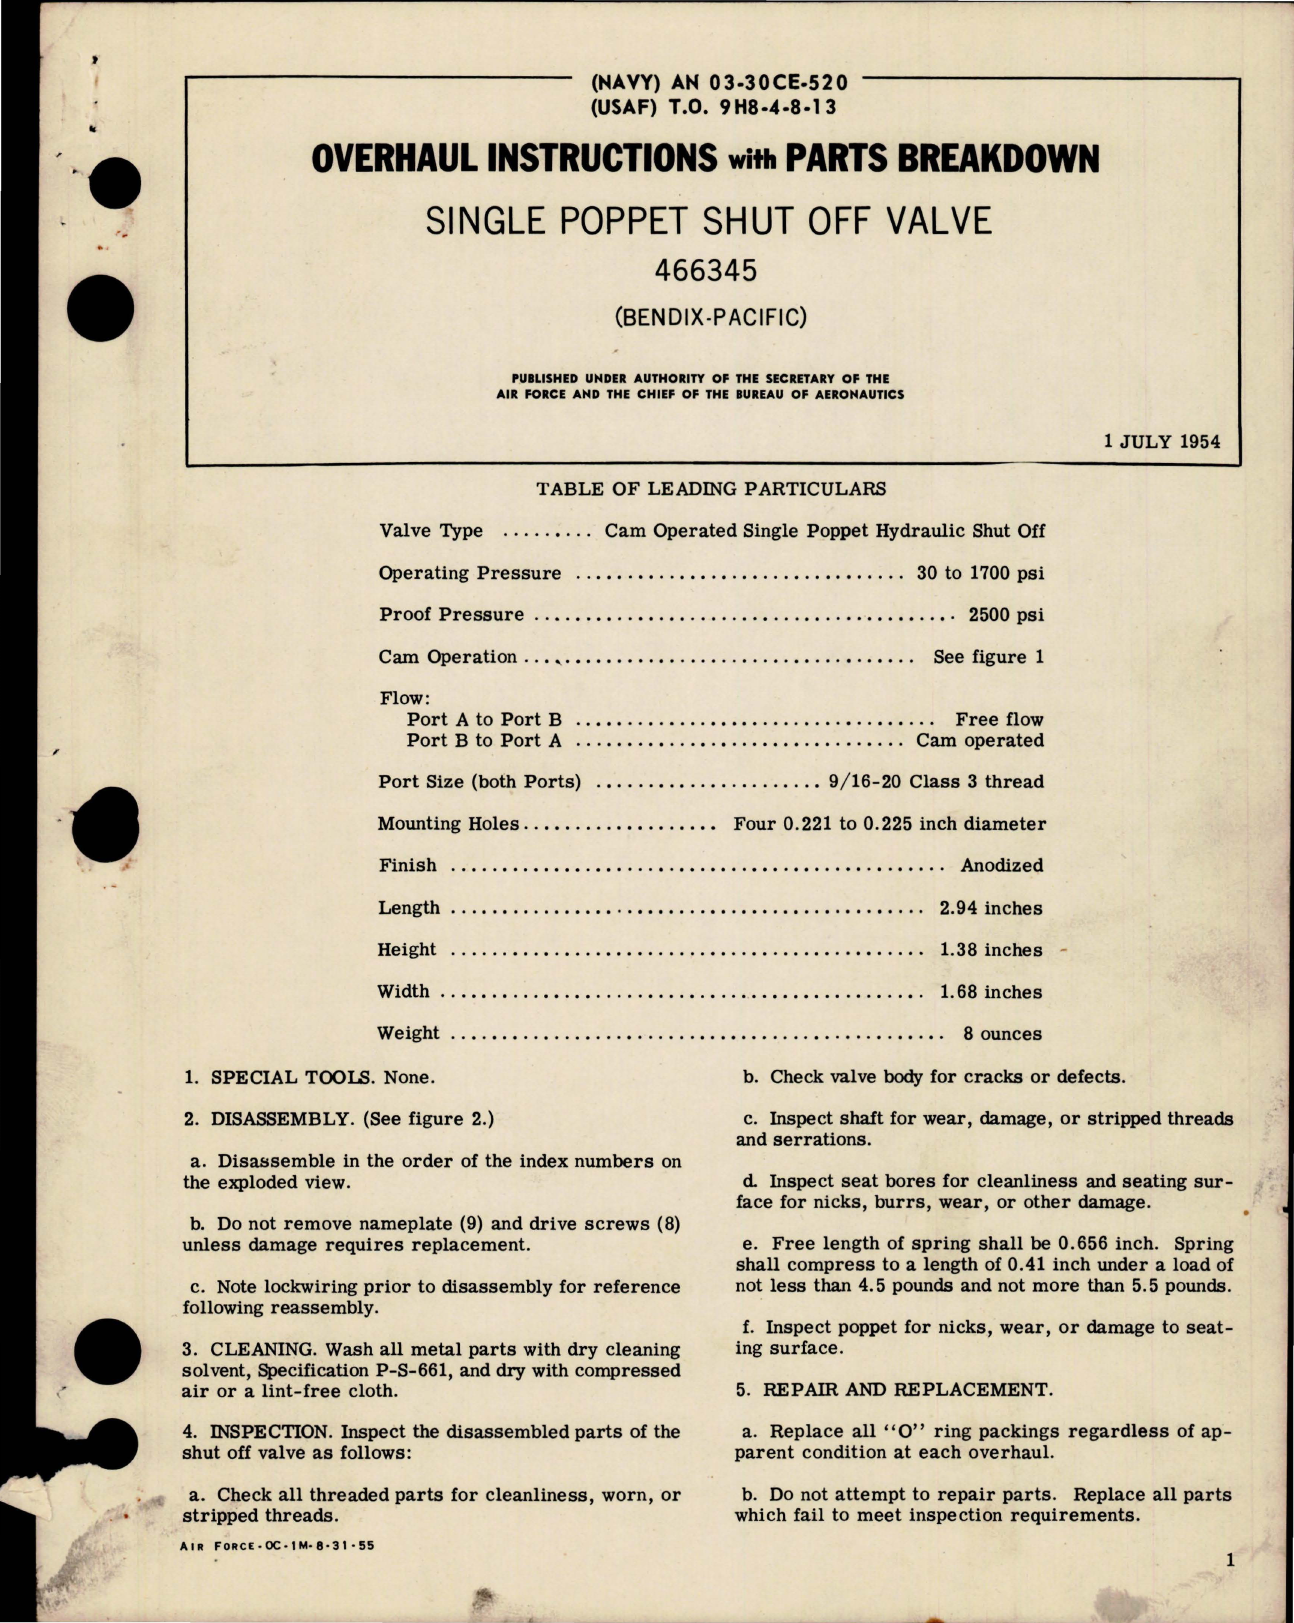 Sample page 1 from AirCorps Library document: Overhaul Instructions with Parts for Single Poppet Shut Off Valve - 466345 